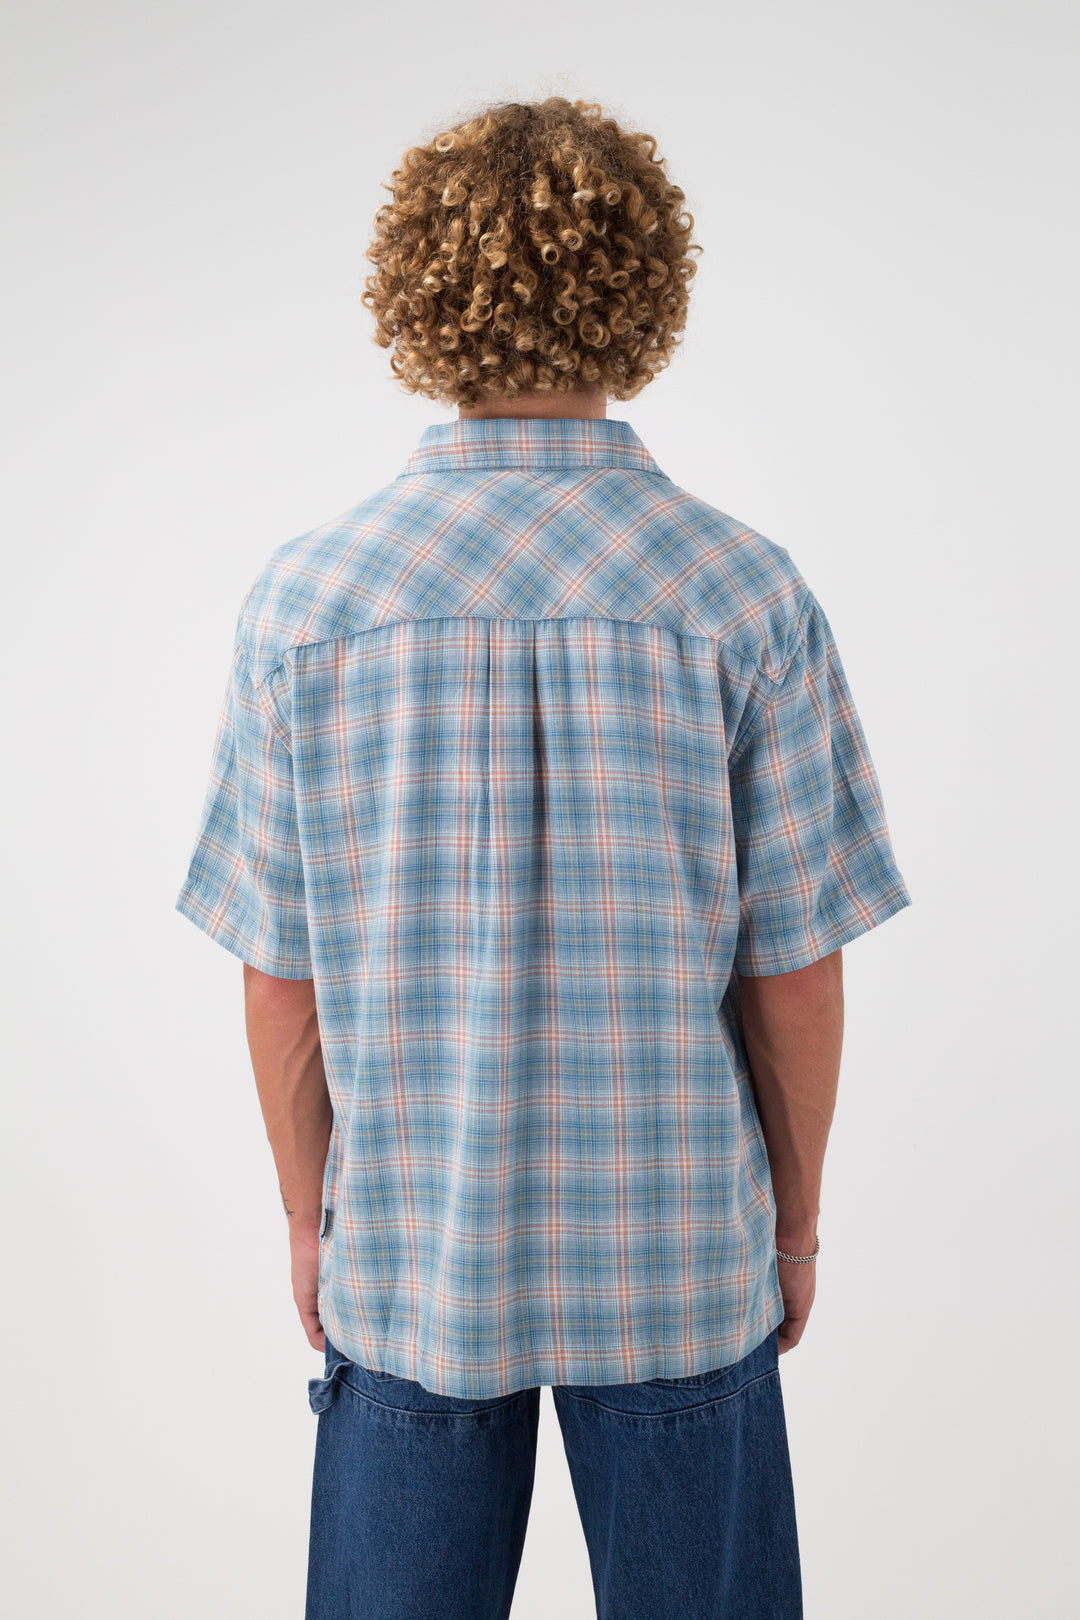 Afends Position Recycled Short Sleeve Shirt